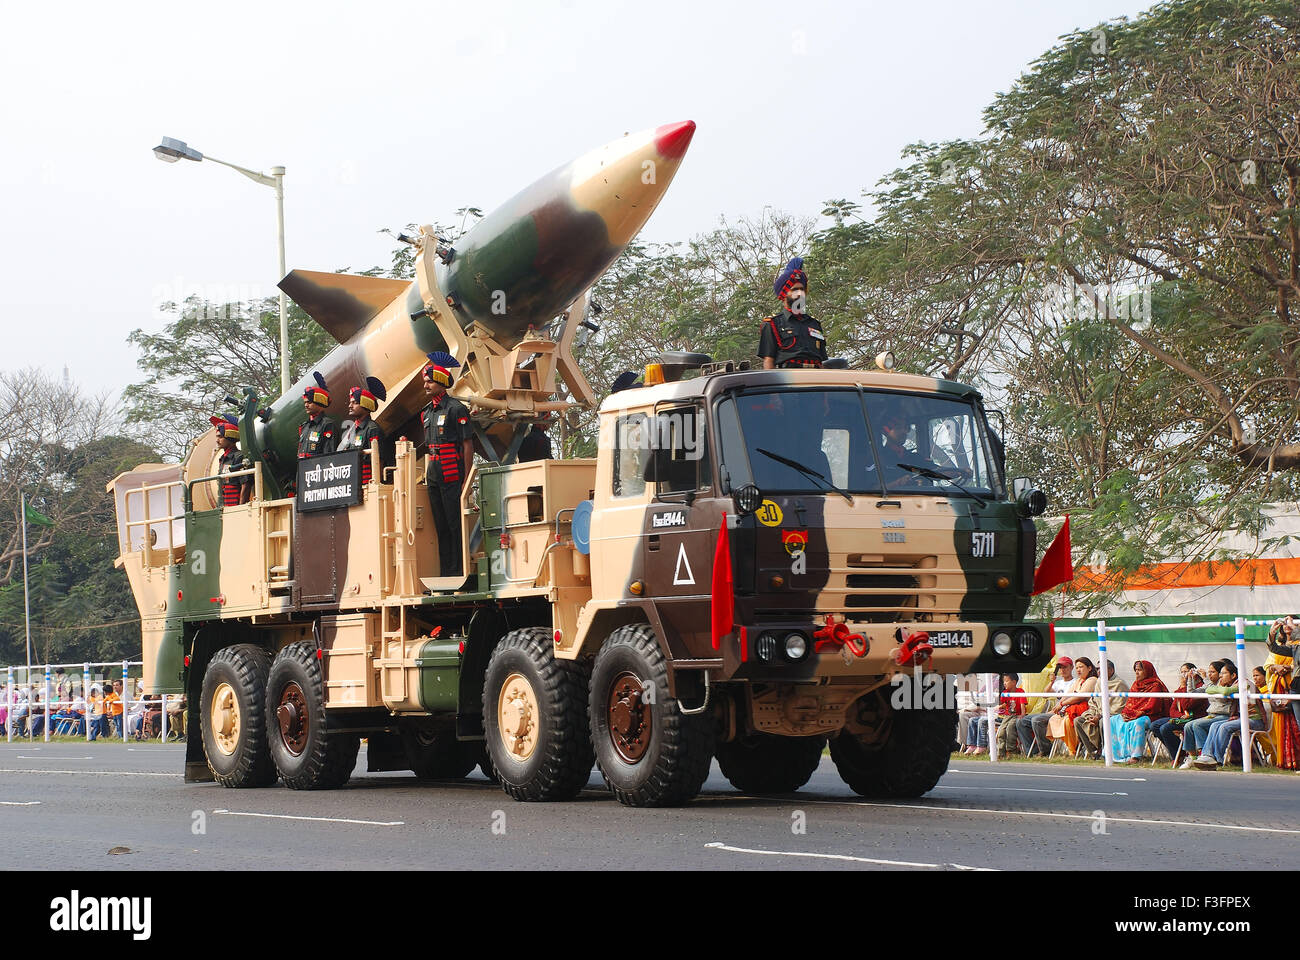 Prithvi missile launcher with Indian army soldiers parade on Republic Day Stock Photo